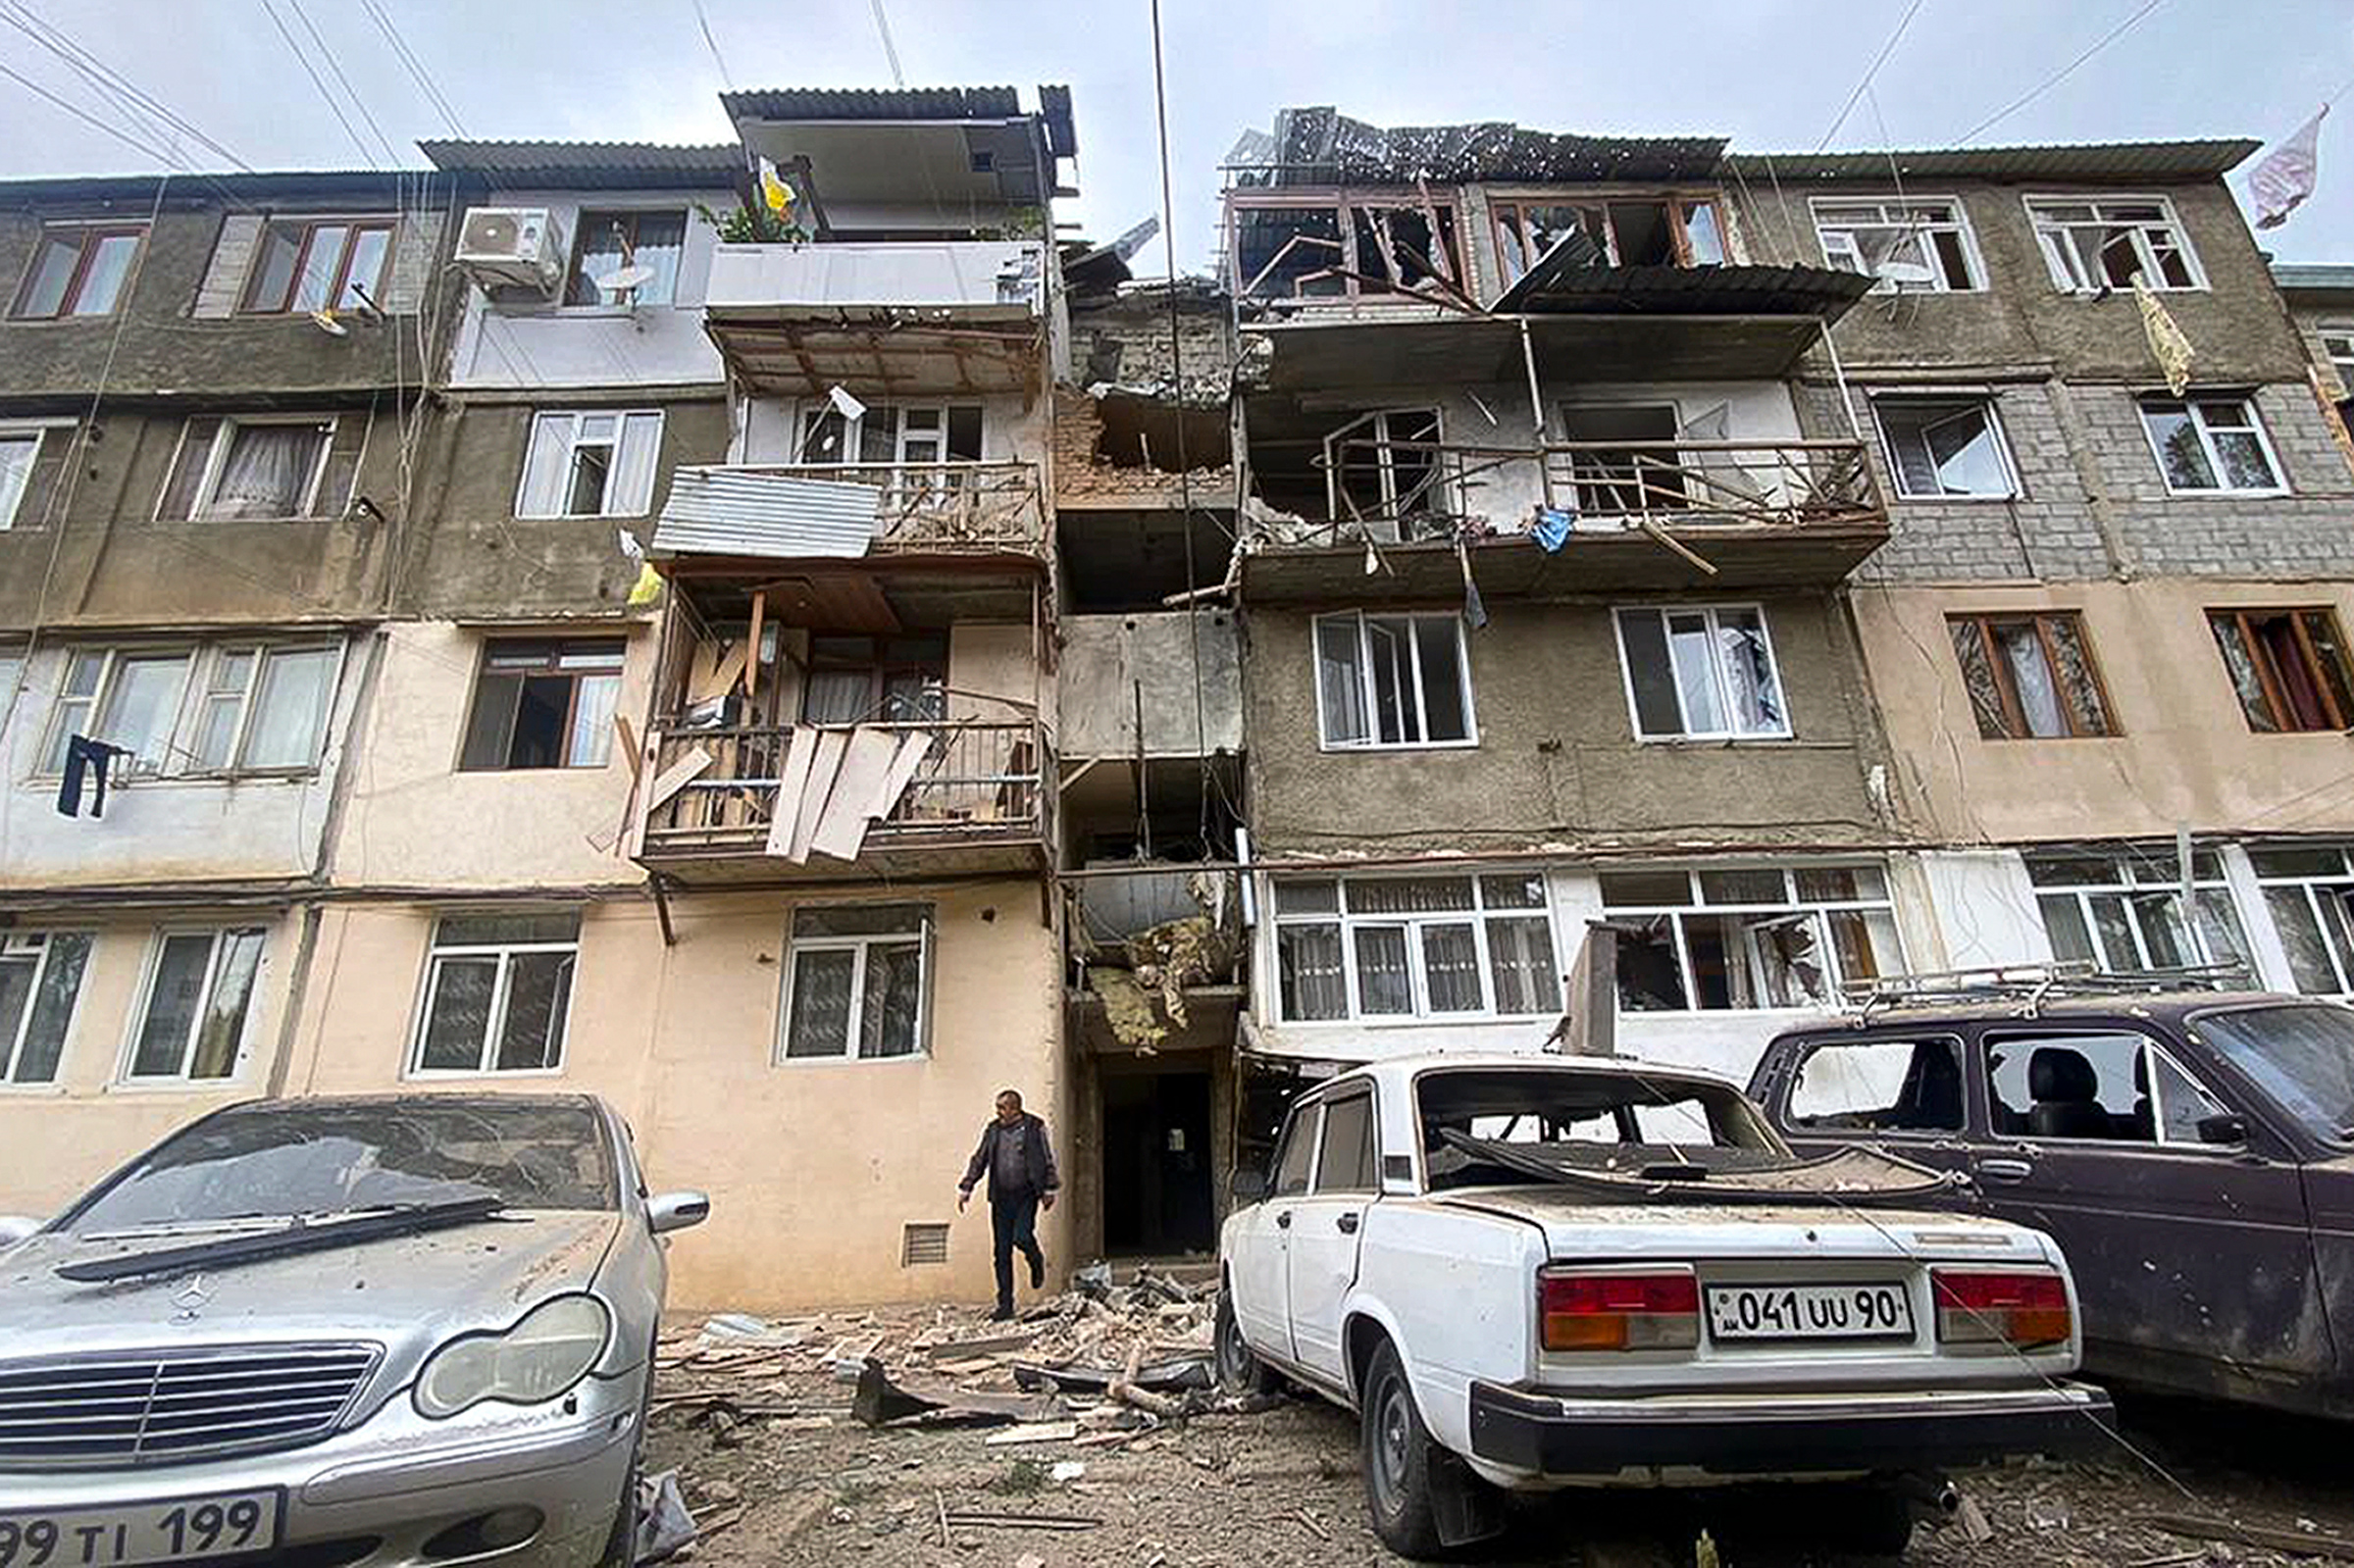 A damaged residential apartment building following shelling in Stepanakert, Nagorno-Karabakh, on Sept. 19. Azerbaijan on Tuesday declared that it started what it called an "anti-terrorist operation" targeting Armenian military positions in the Nagorno-Karabakh region.